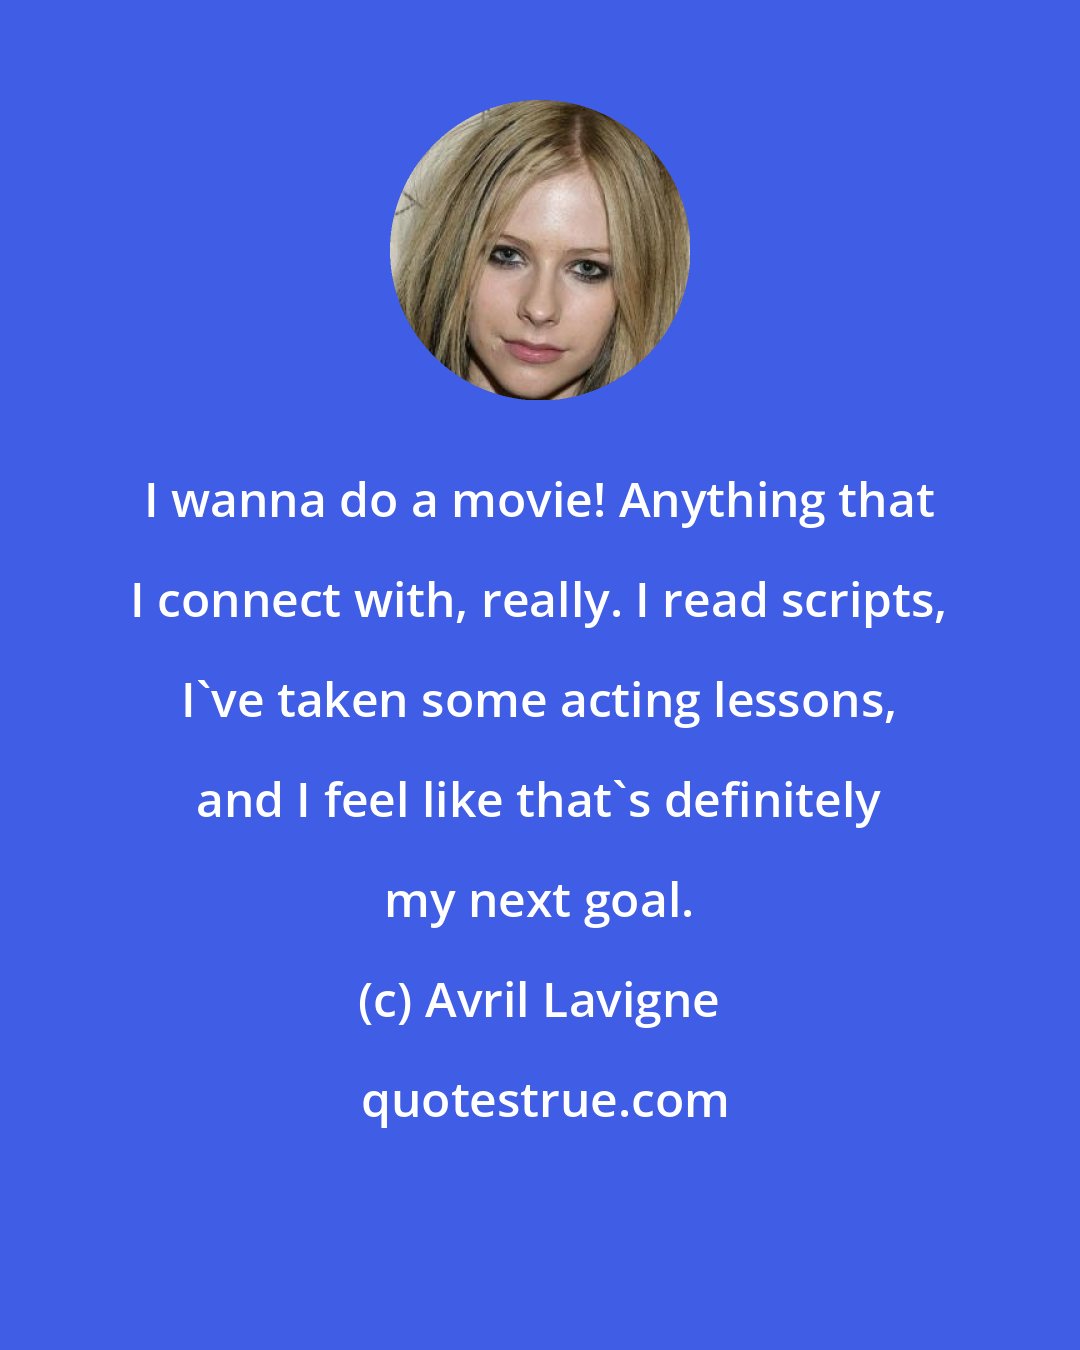 Avril Lavigne: I wanna do a movie! Anything that I connect with, really. I read scripts, I've taken some acting lessons, and I feel like that's definitely my next goal.